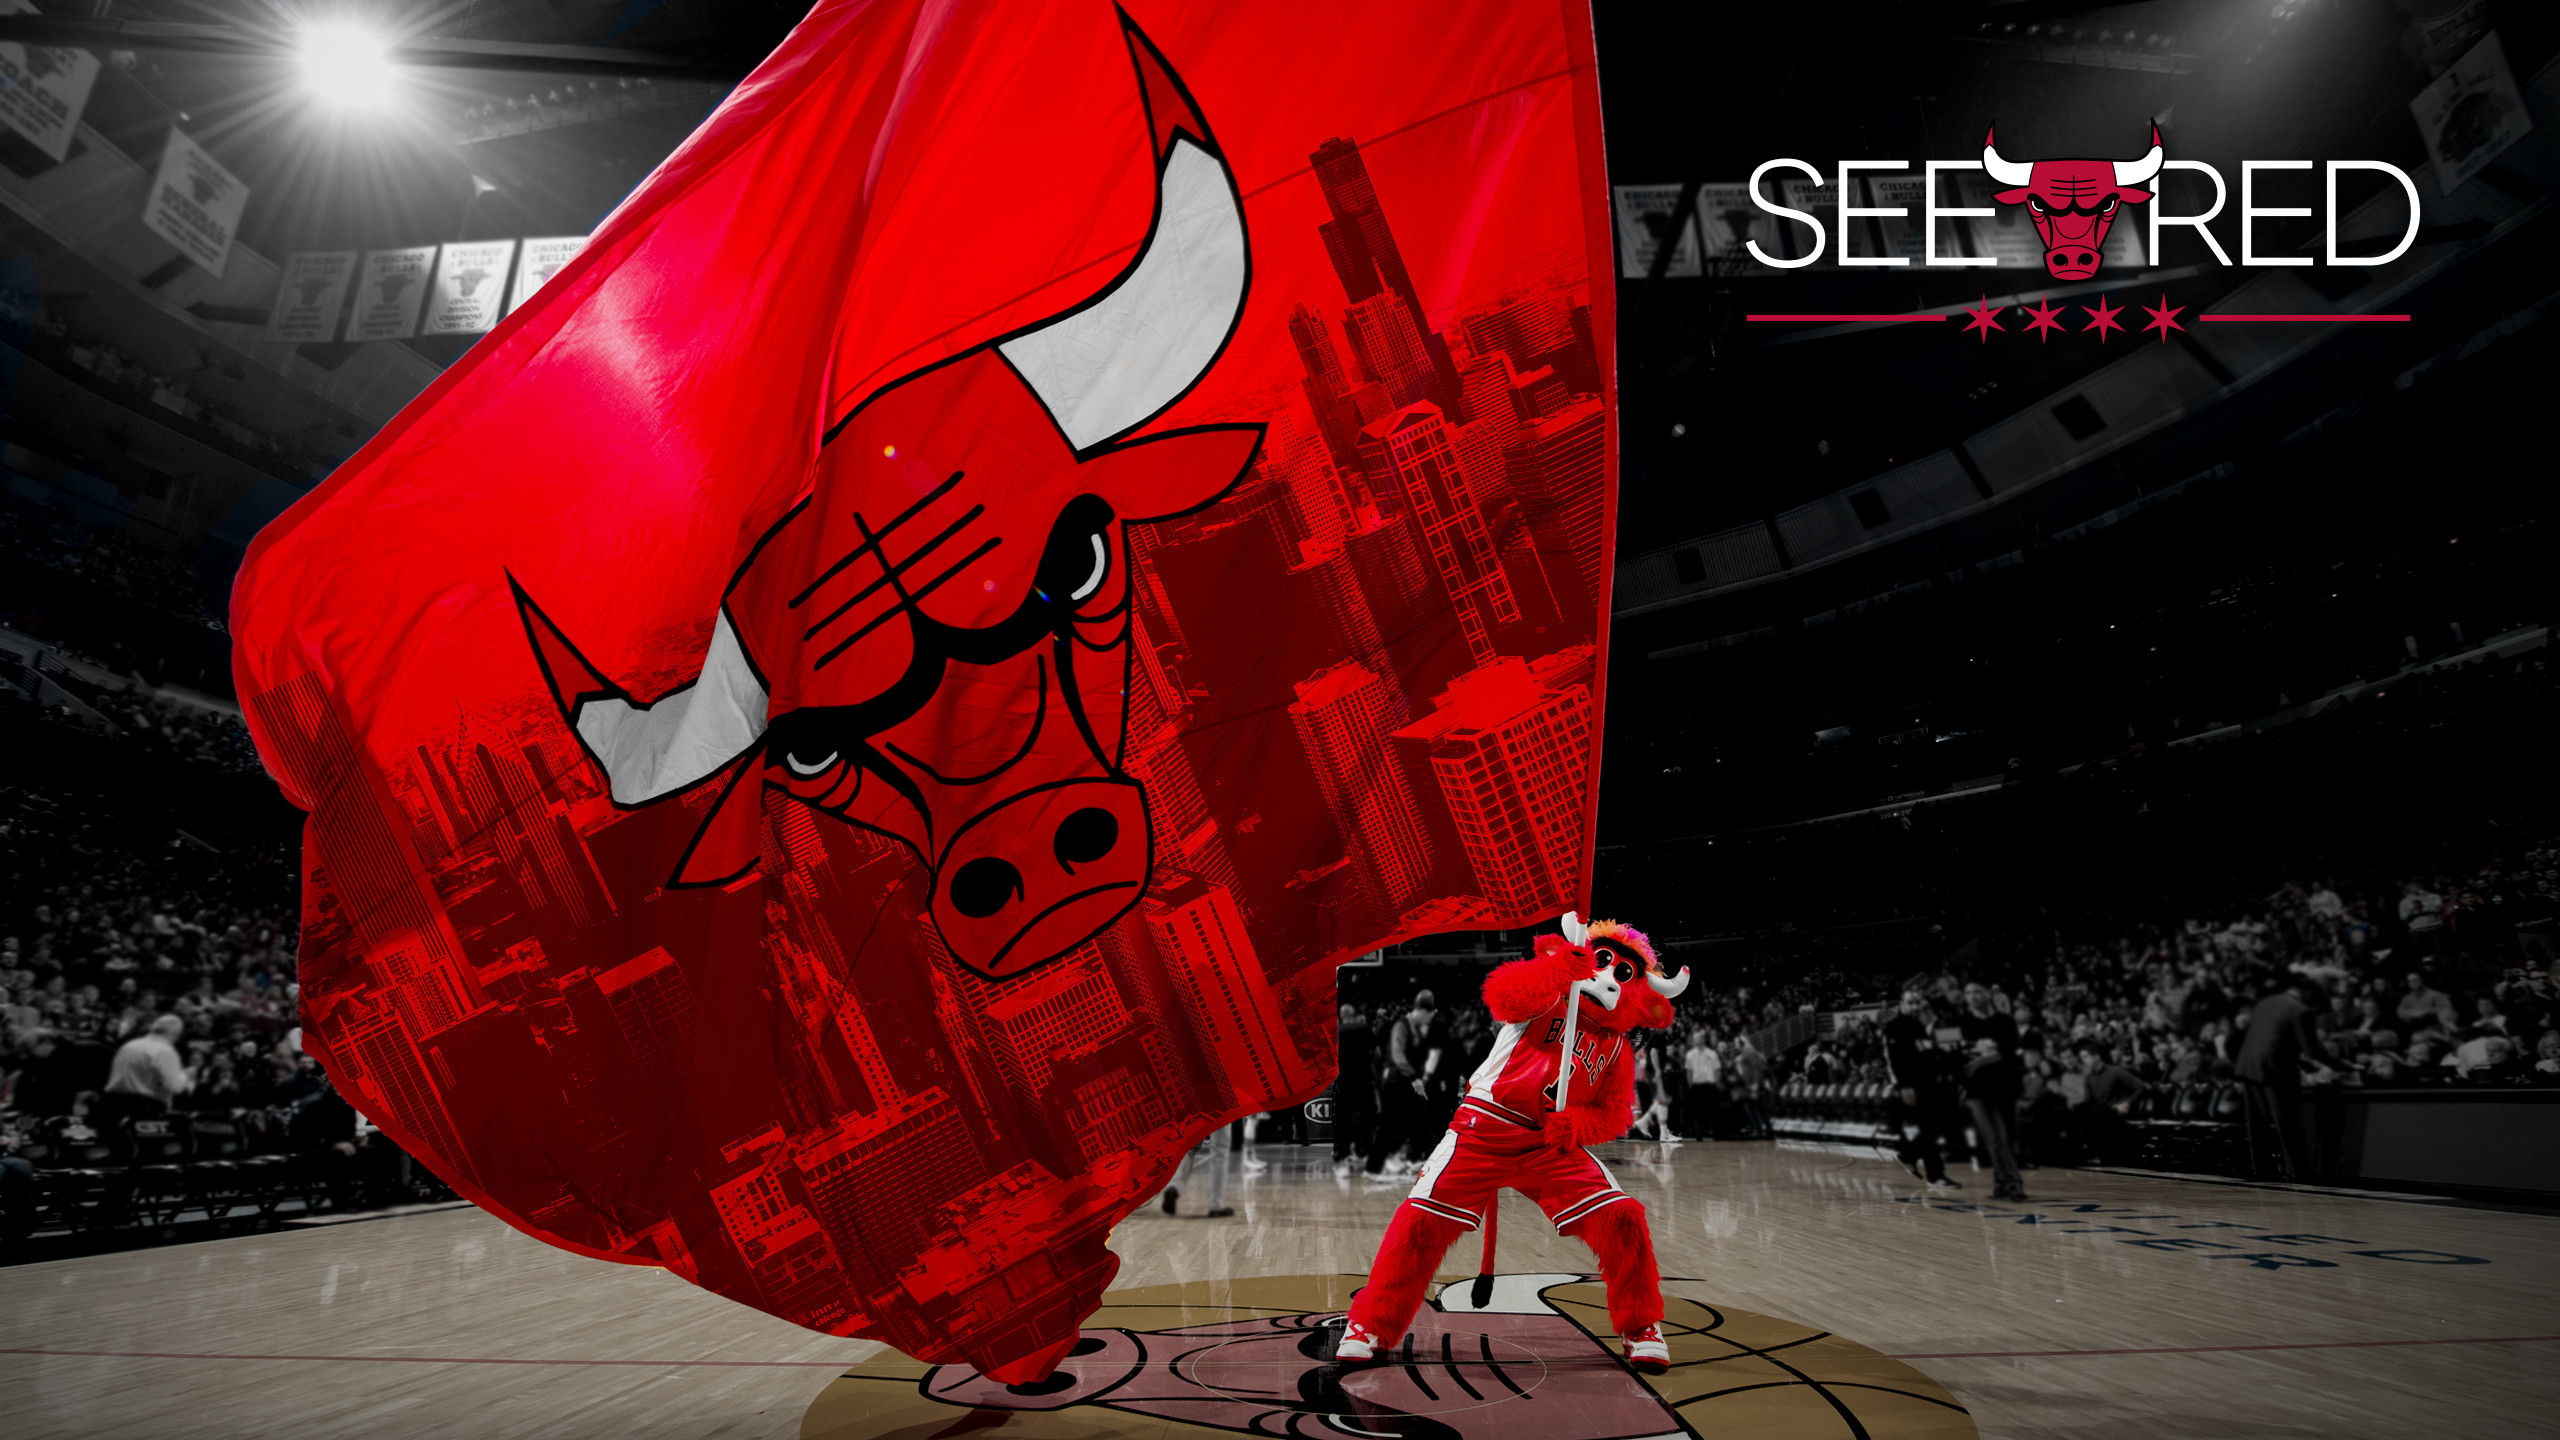 2560x1440 SEE RED - Benny the Bull